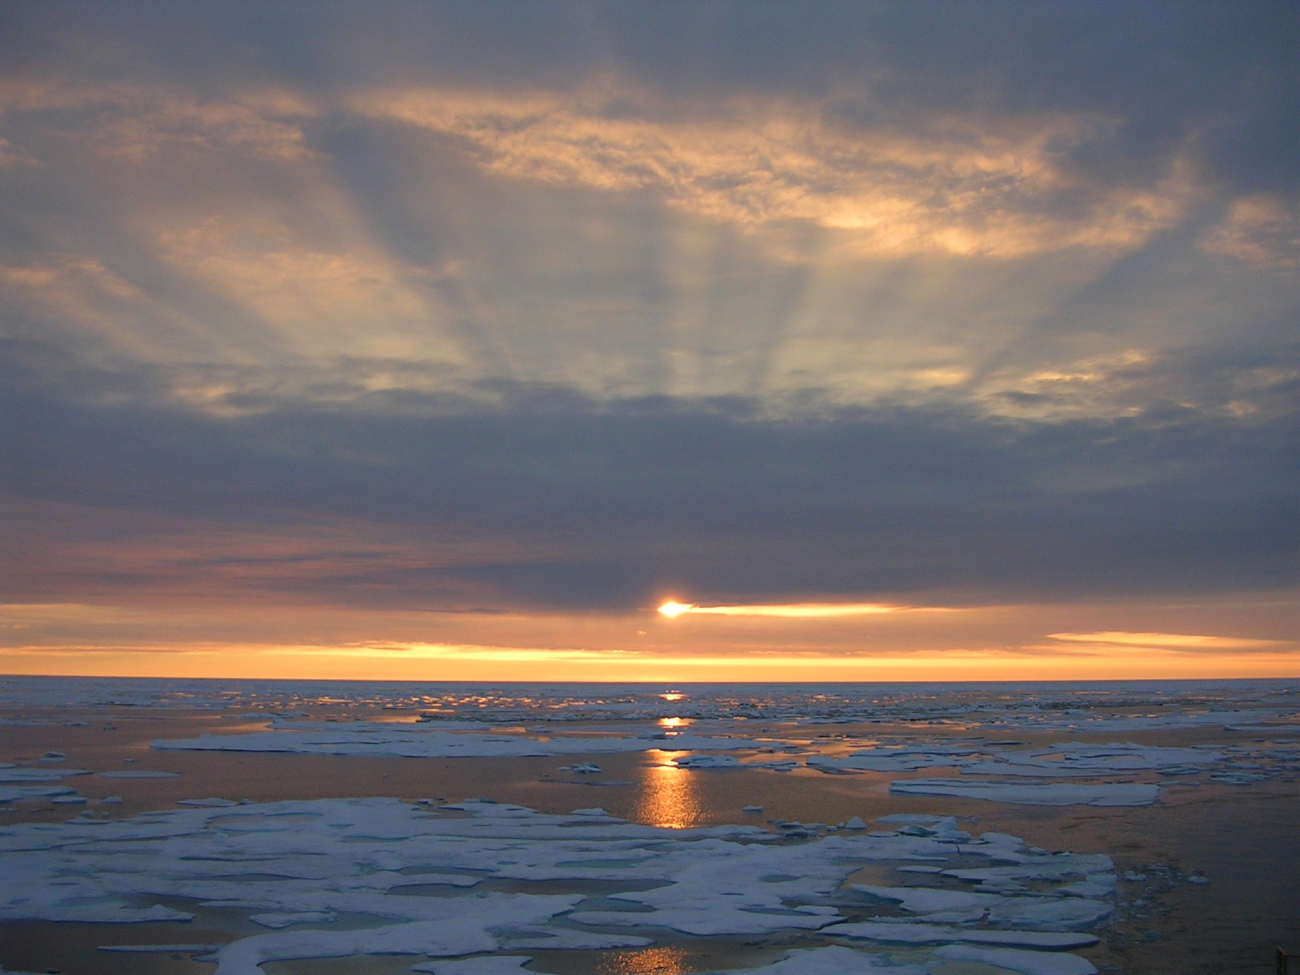 Sunset over the Arctic ice with shadow bands above and reflections on thewater below